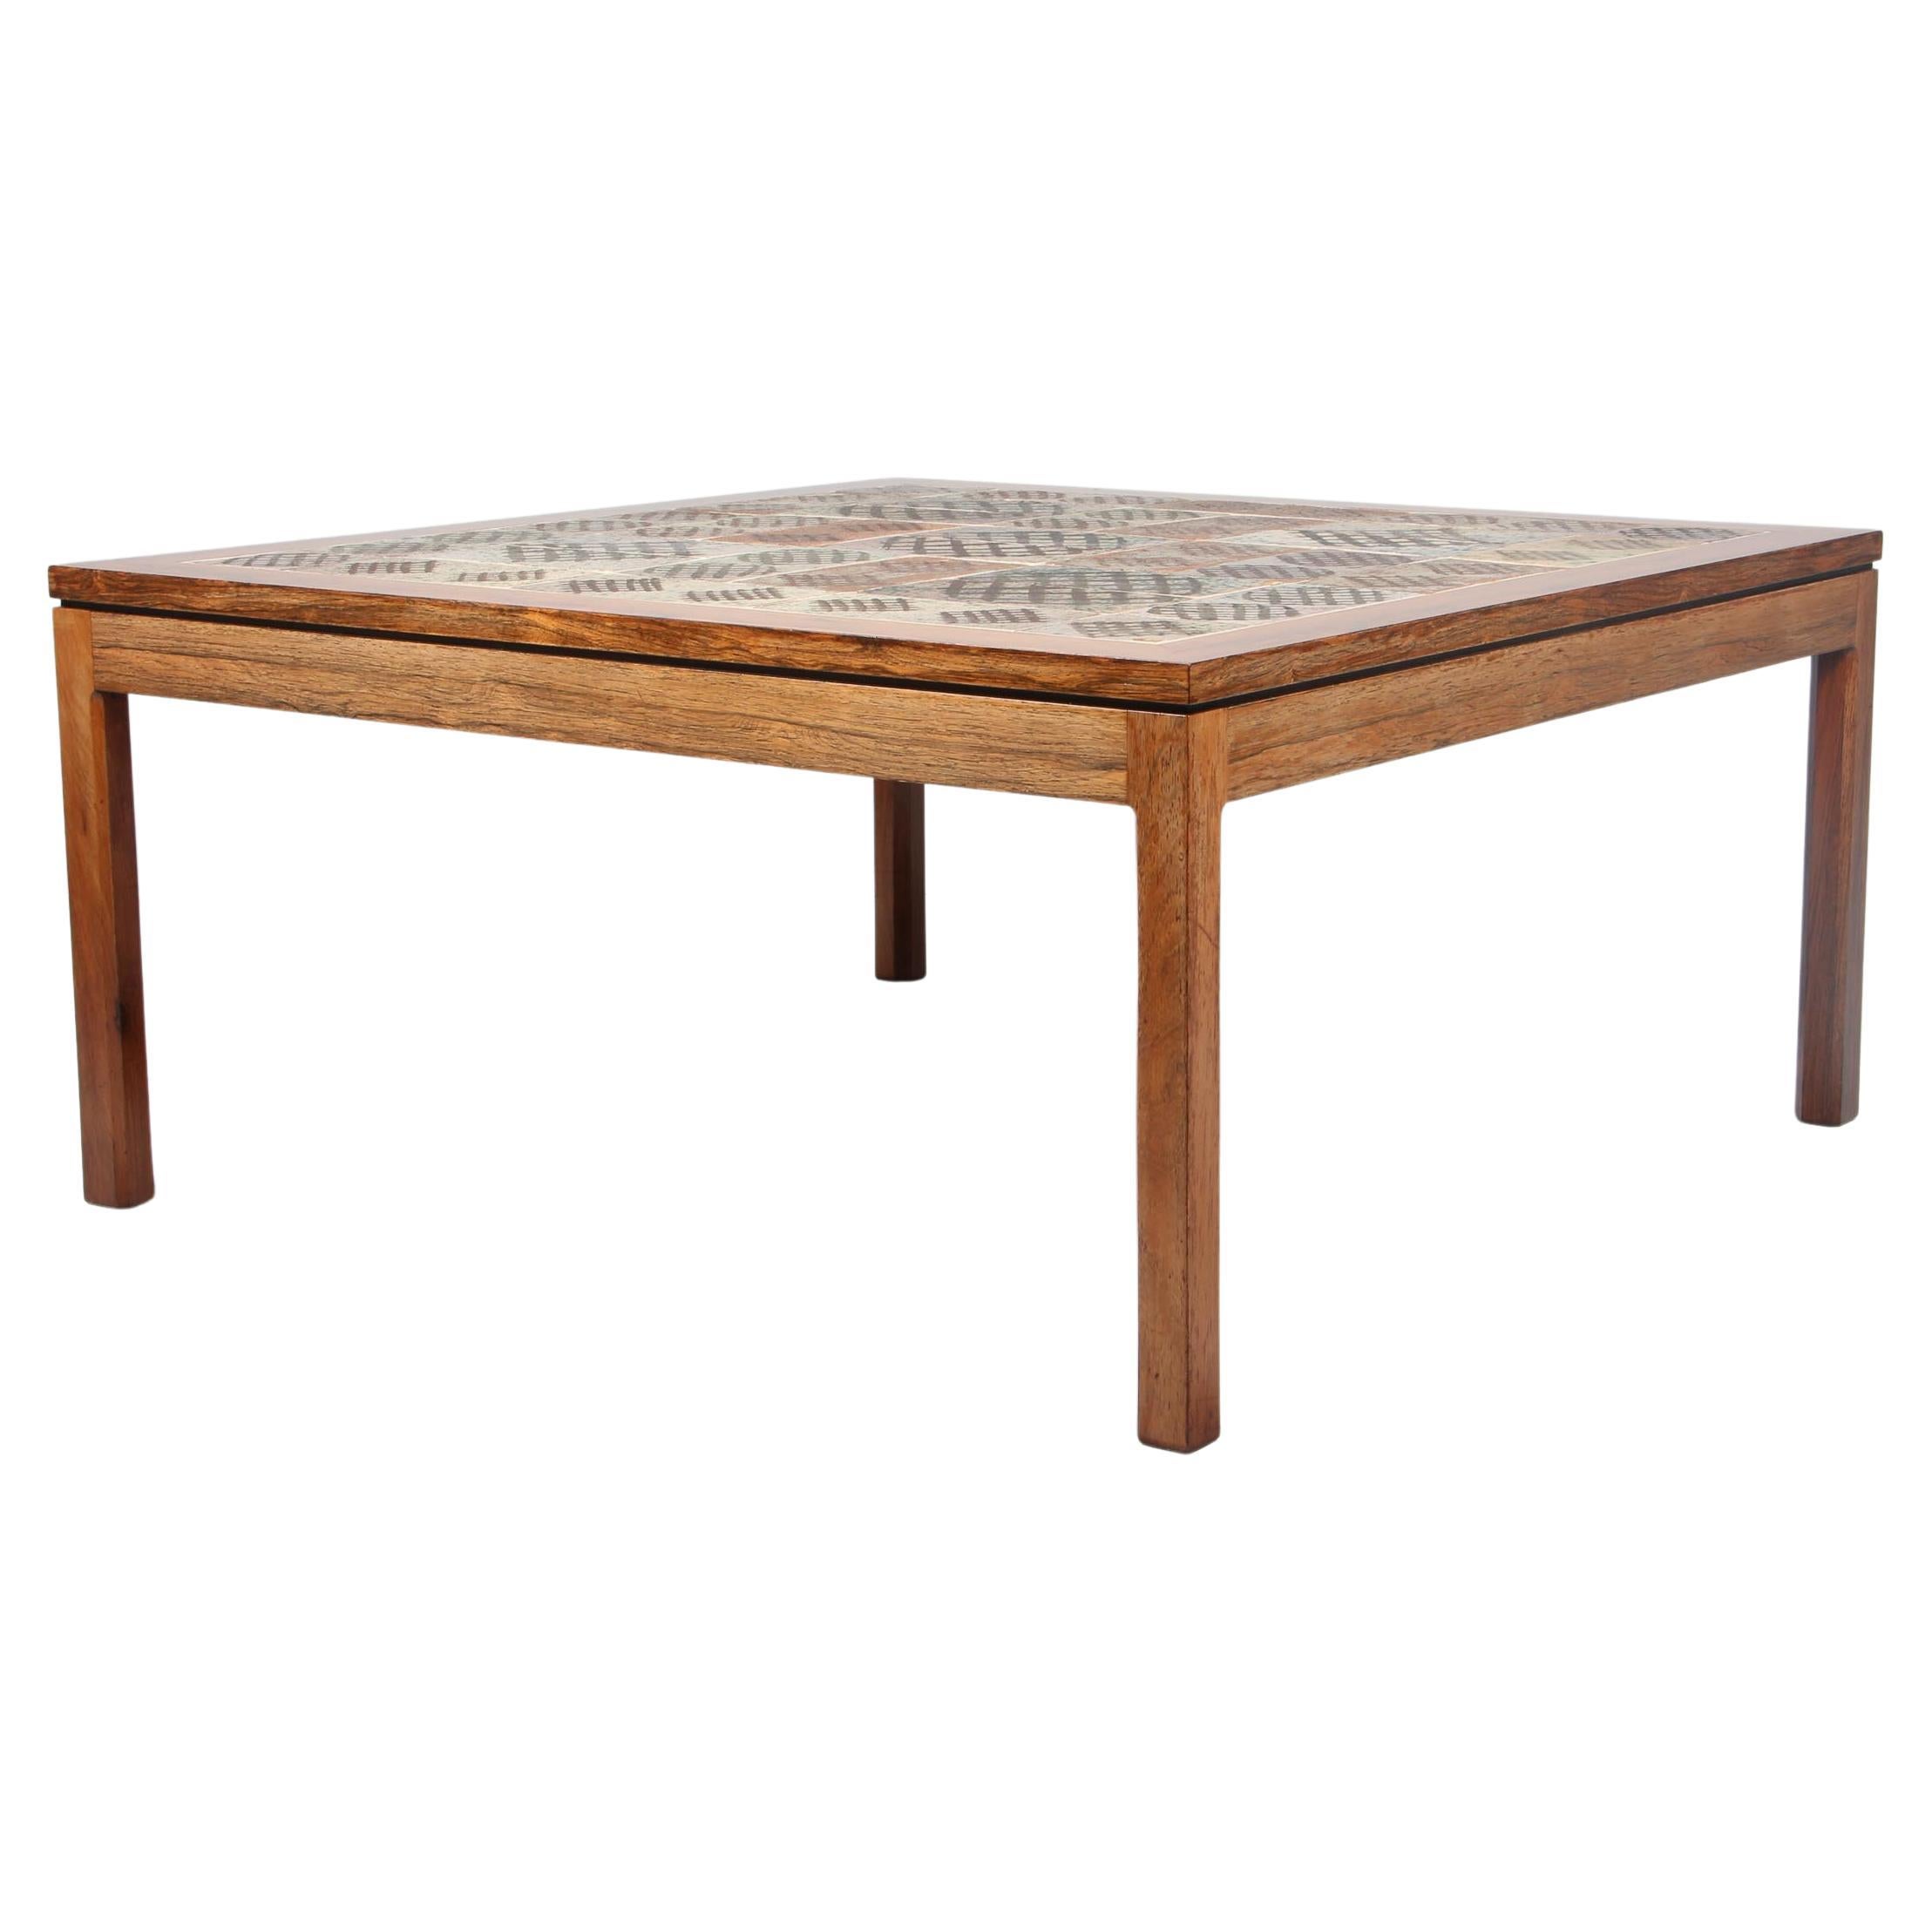 Tue Poulsen Coffee Table in Rosewood and Stoneware Tiles, Denmark, 1970s